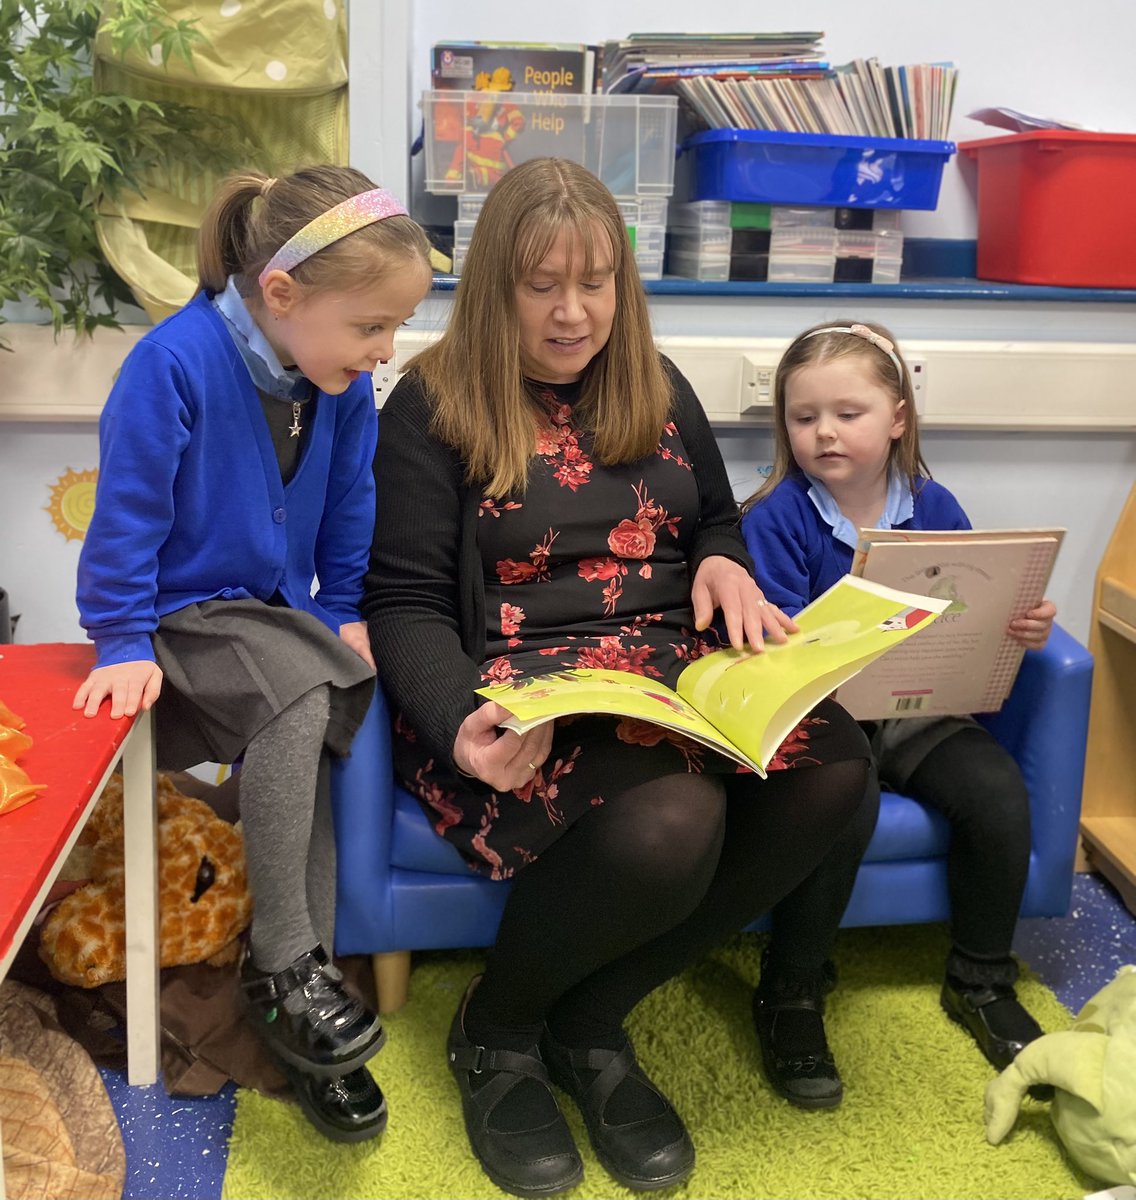 Filming with reception class at St Andrews Primary School in Oswaldtwistle this morning - as figures show 30% of kids in the North West lack essential literacy skills by age 5. It’s an issue teachers here say they are seeing more and more - full story on @BBCNWT tonight